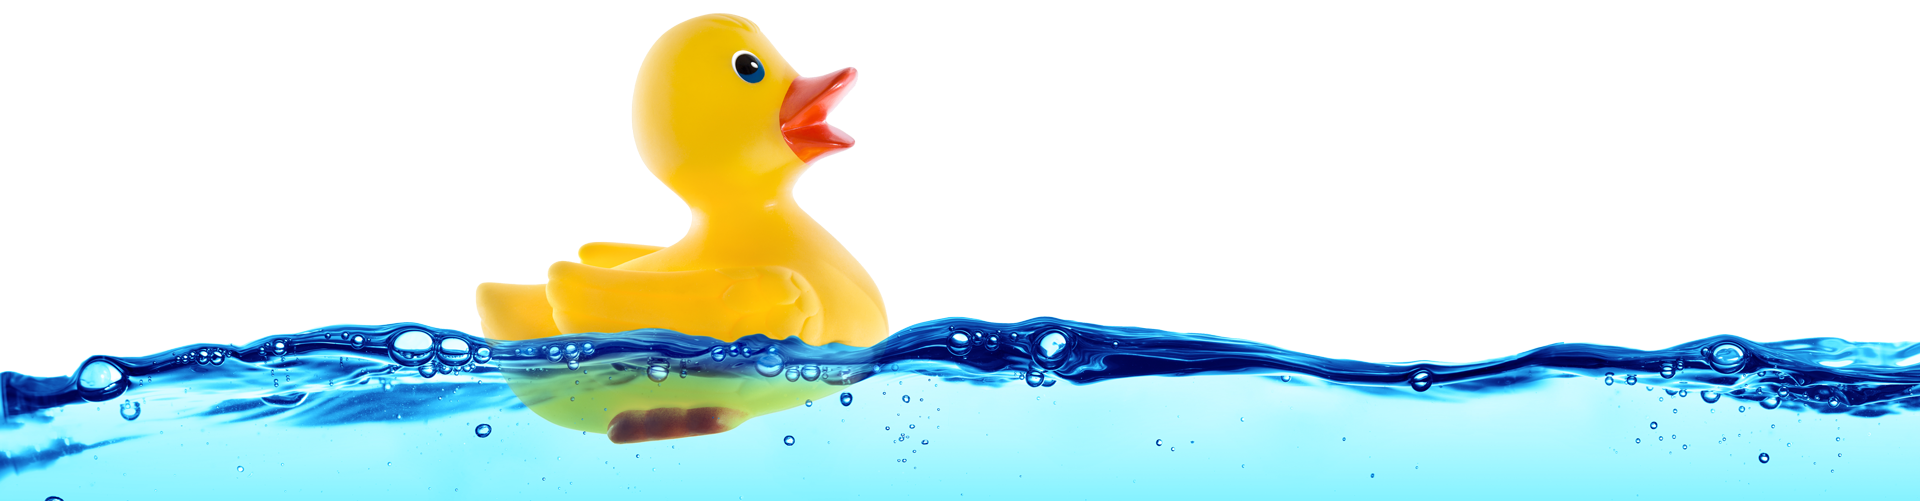 rubber duck in water swimming photo #39287